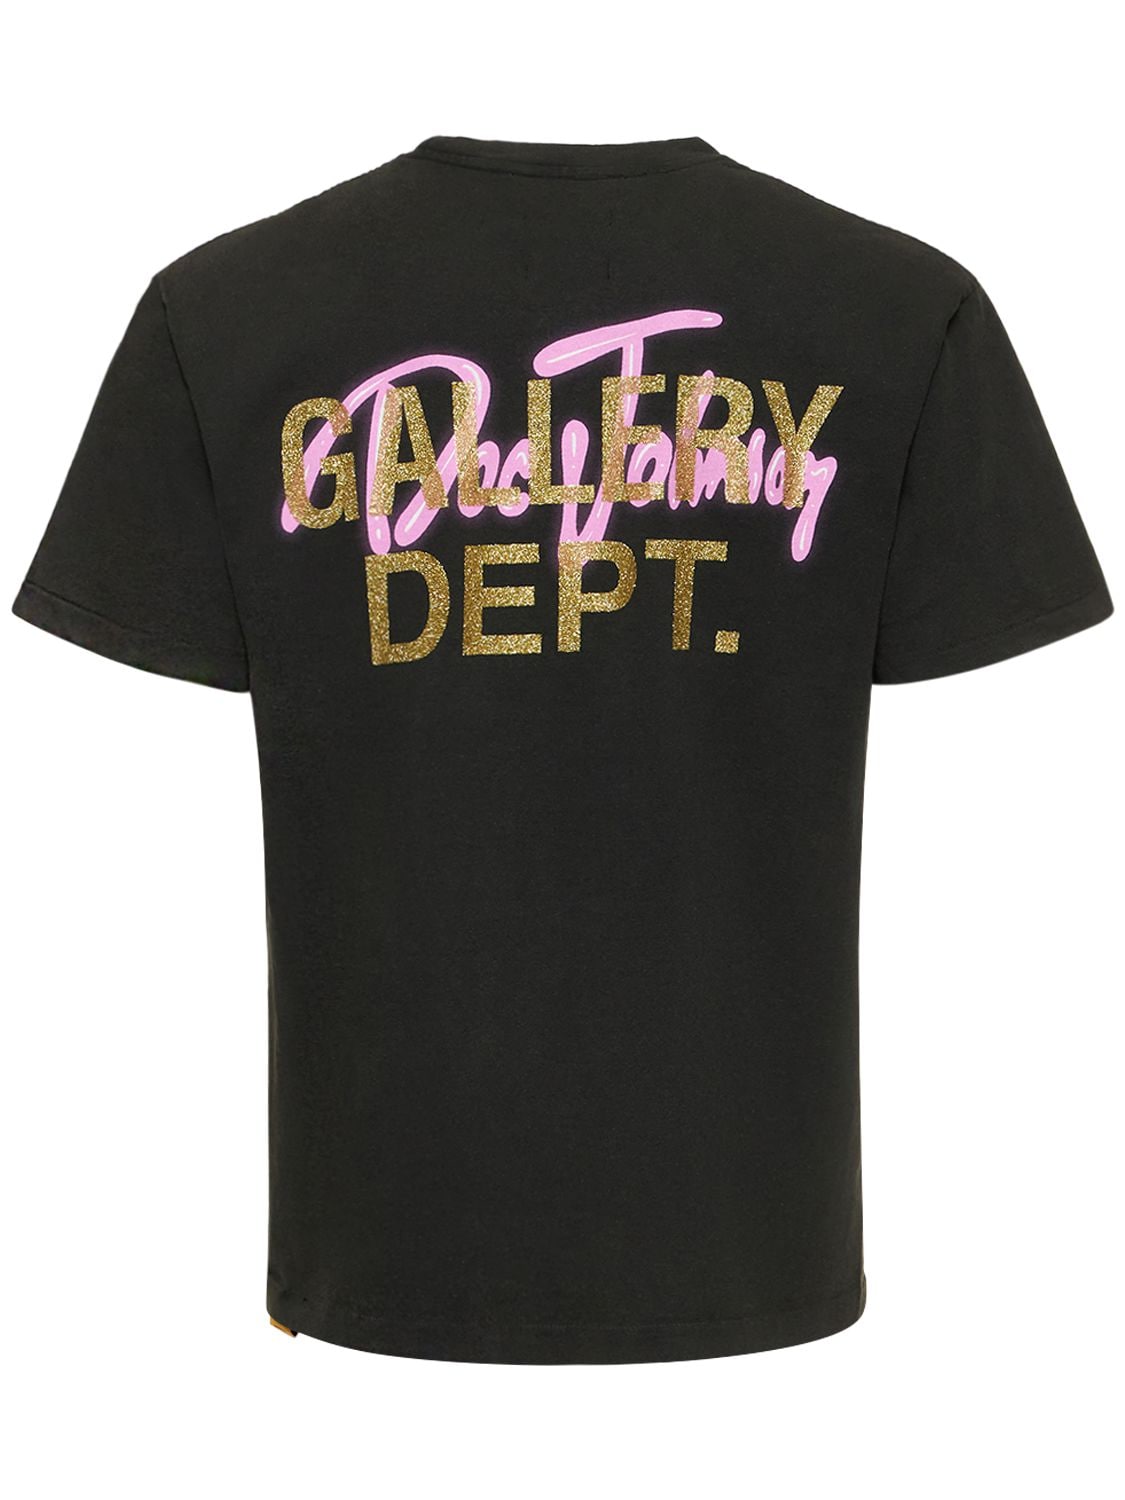 GALLERY DEPT. Body Cocktails Cotton Jersey T-shirt